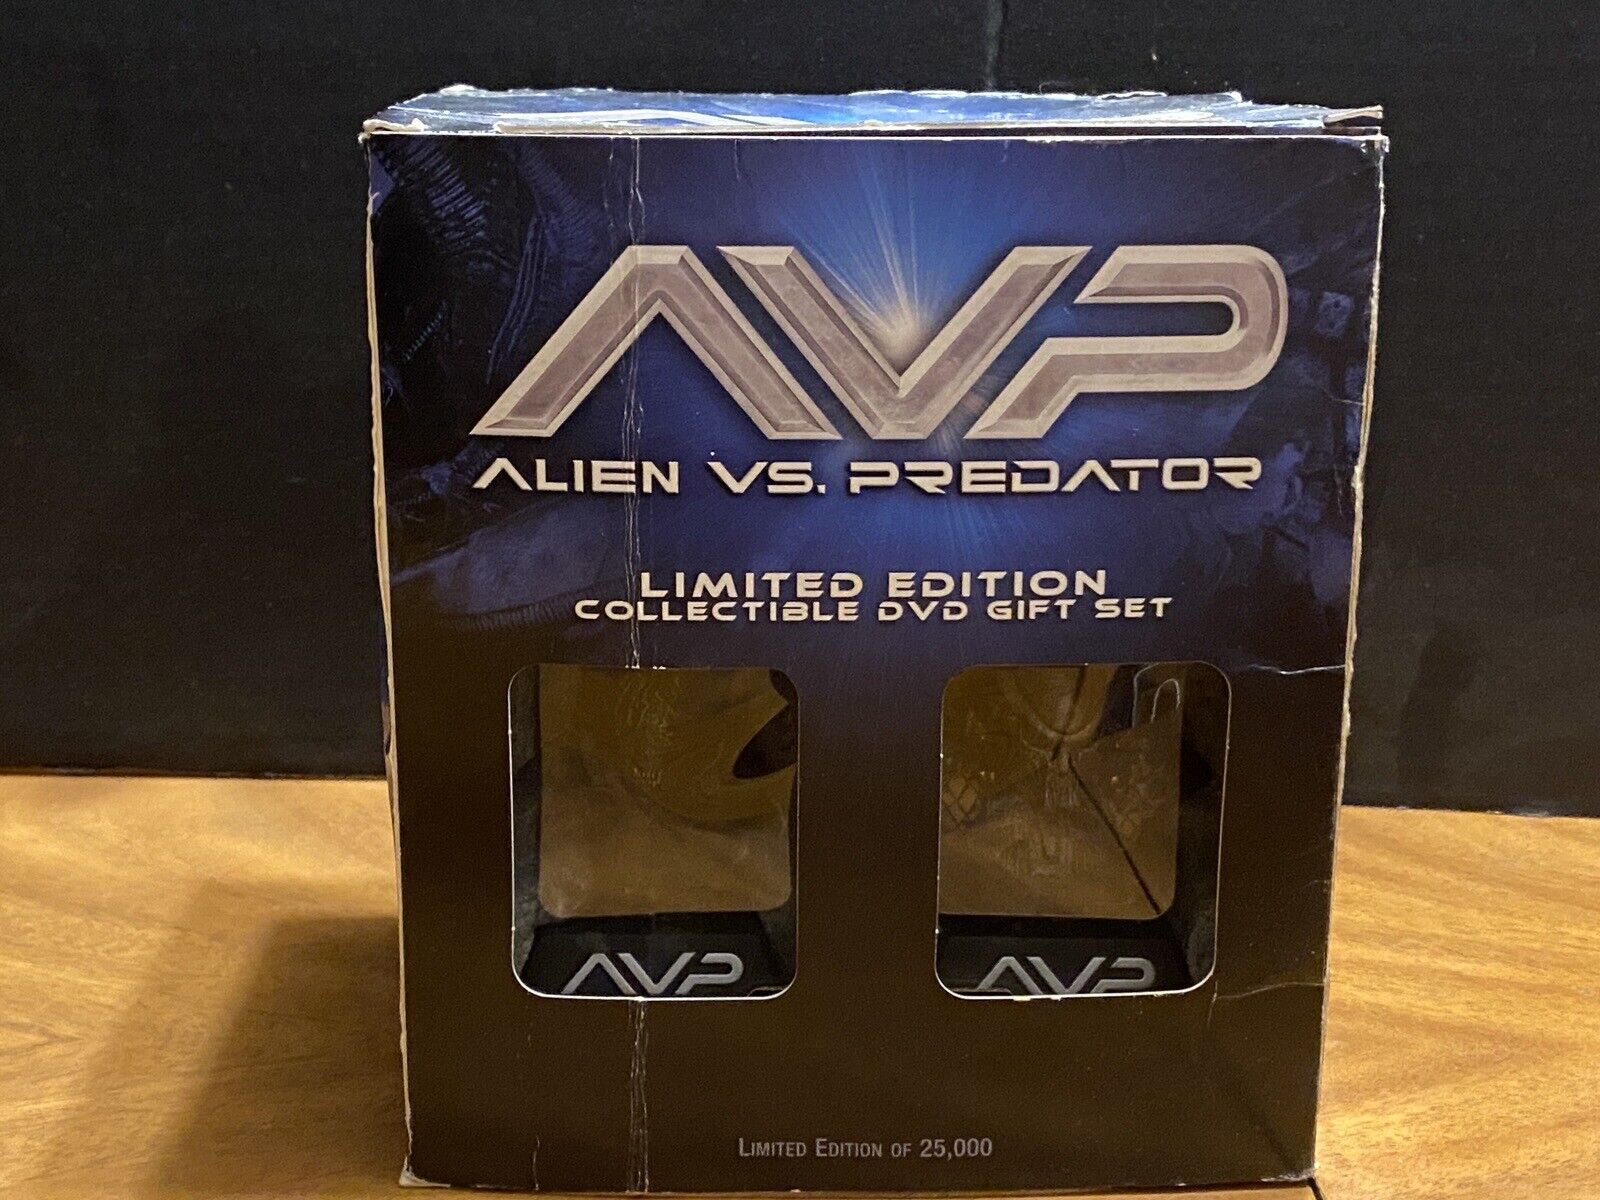 Aliens Vs Predator Limited Edition collectible DVD set, DVD not included